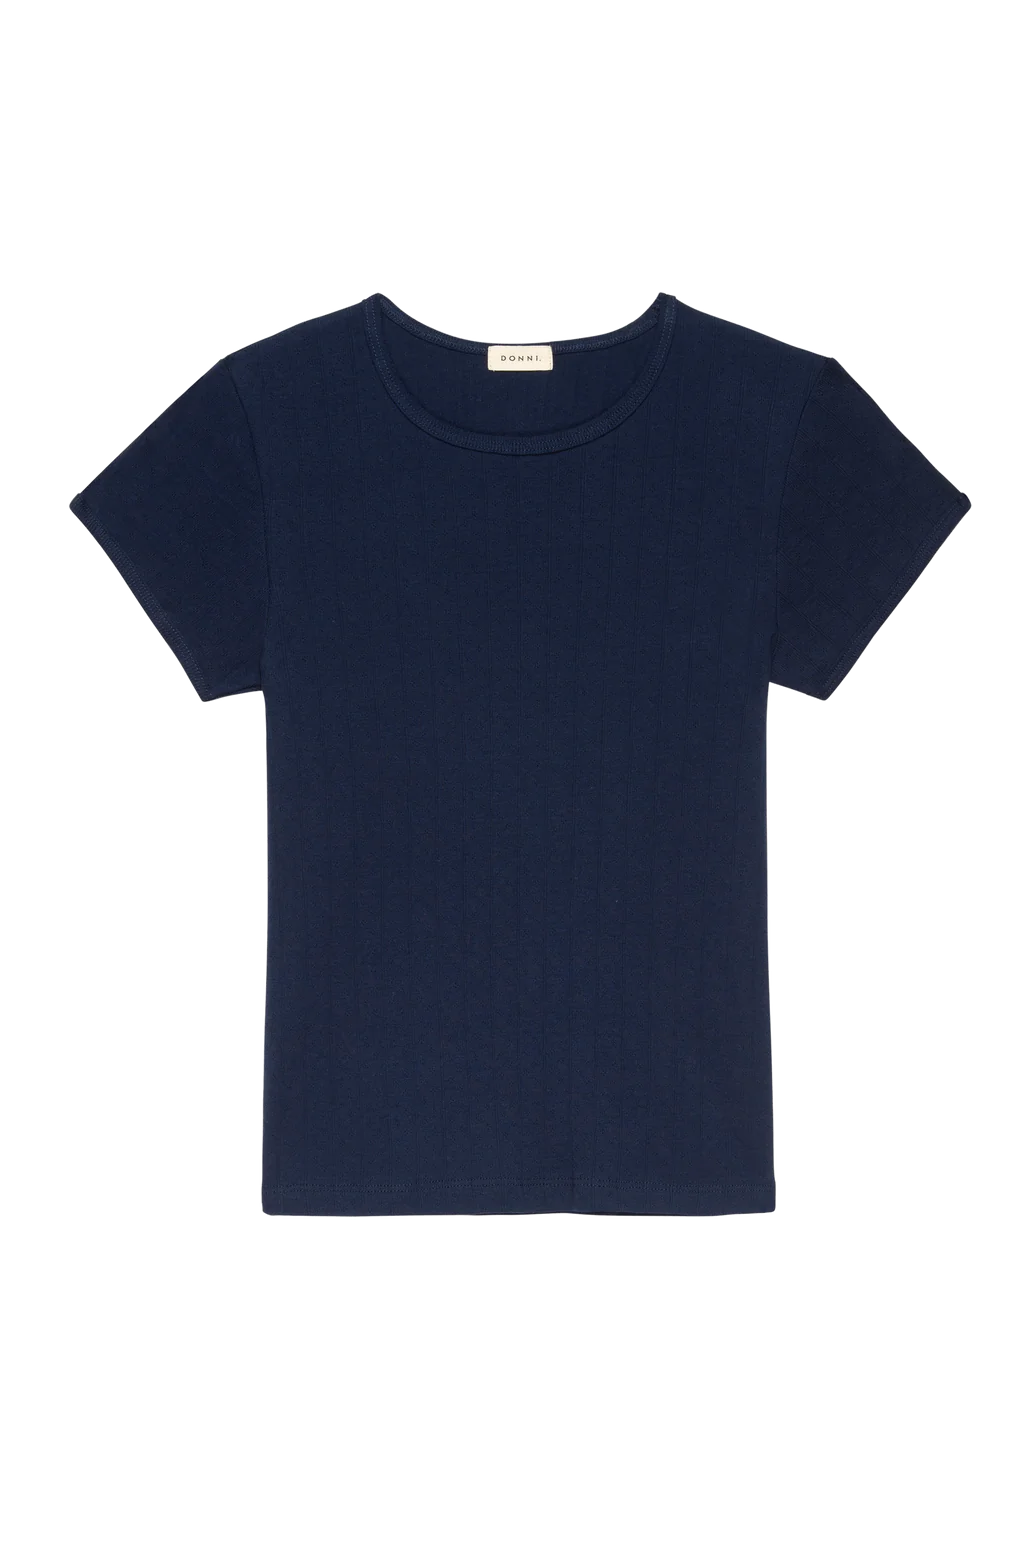 DONNI. The Pointelle Baby Tee